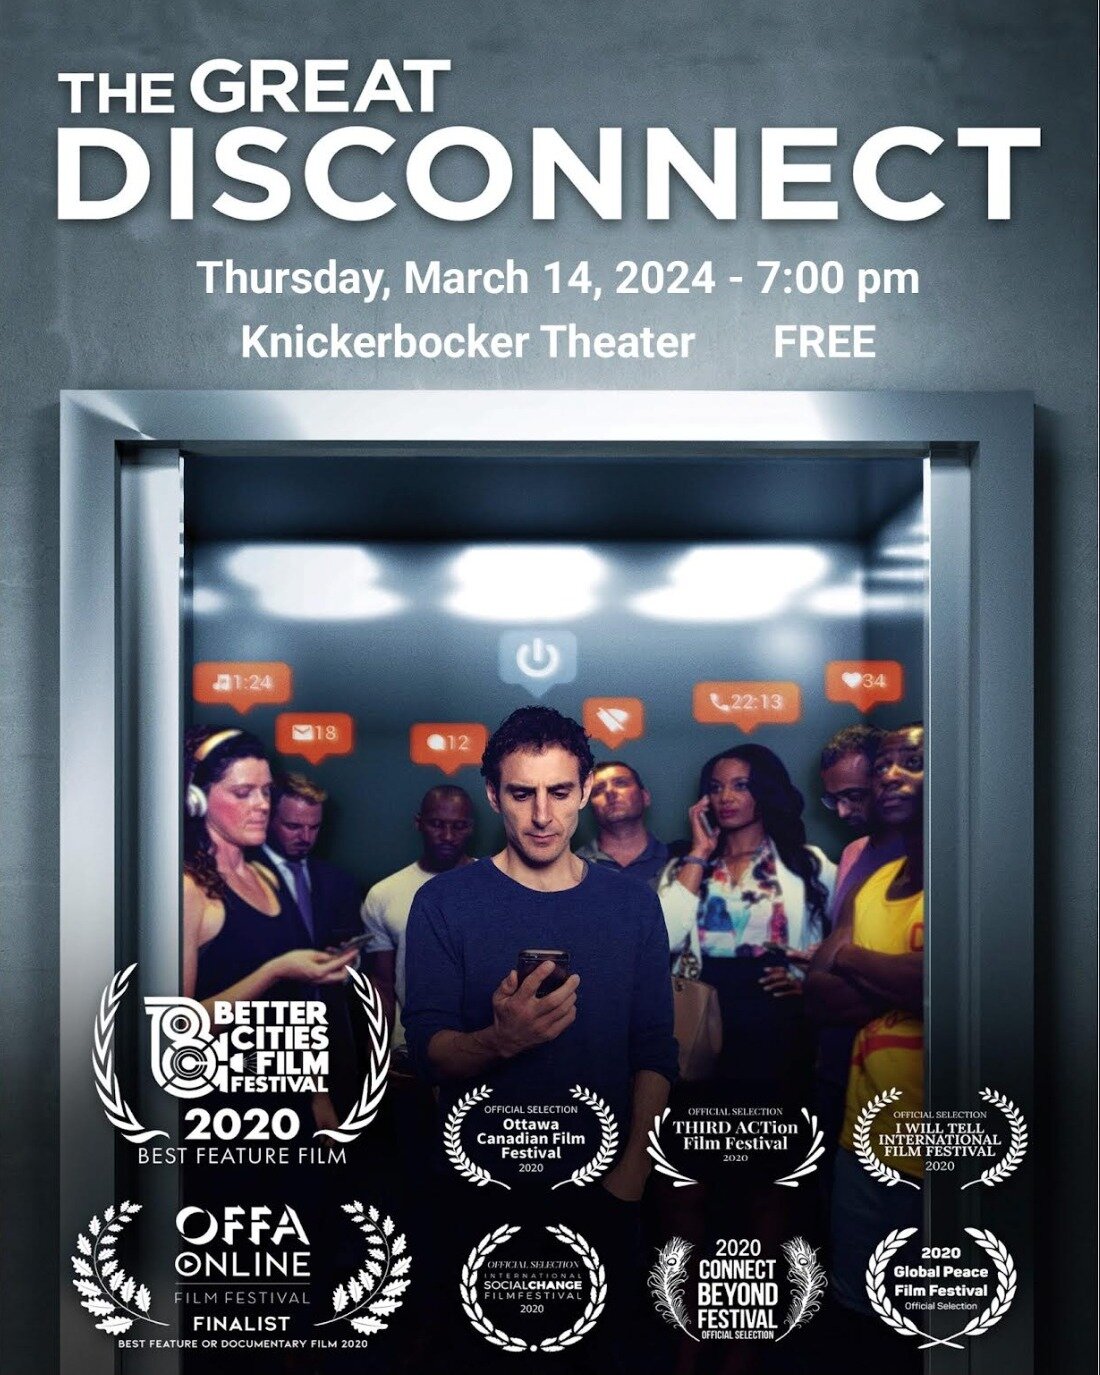 Mark your calendars for this free event March 14th at the Knickerbocker Theater at 7pm. 3Sixty is one of the sponsors of the film screening of award winning &quot;The Great Disconnect&quot; and we are so excited to have a discussion afterwards. Share